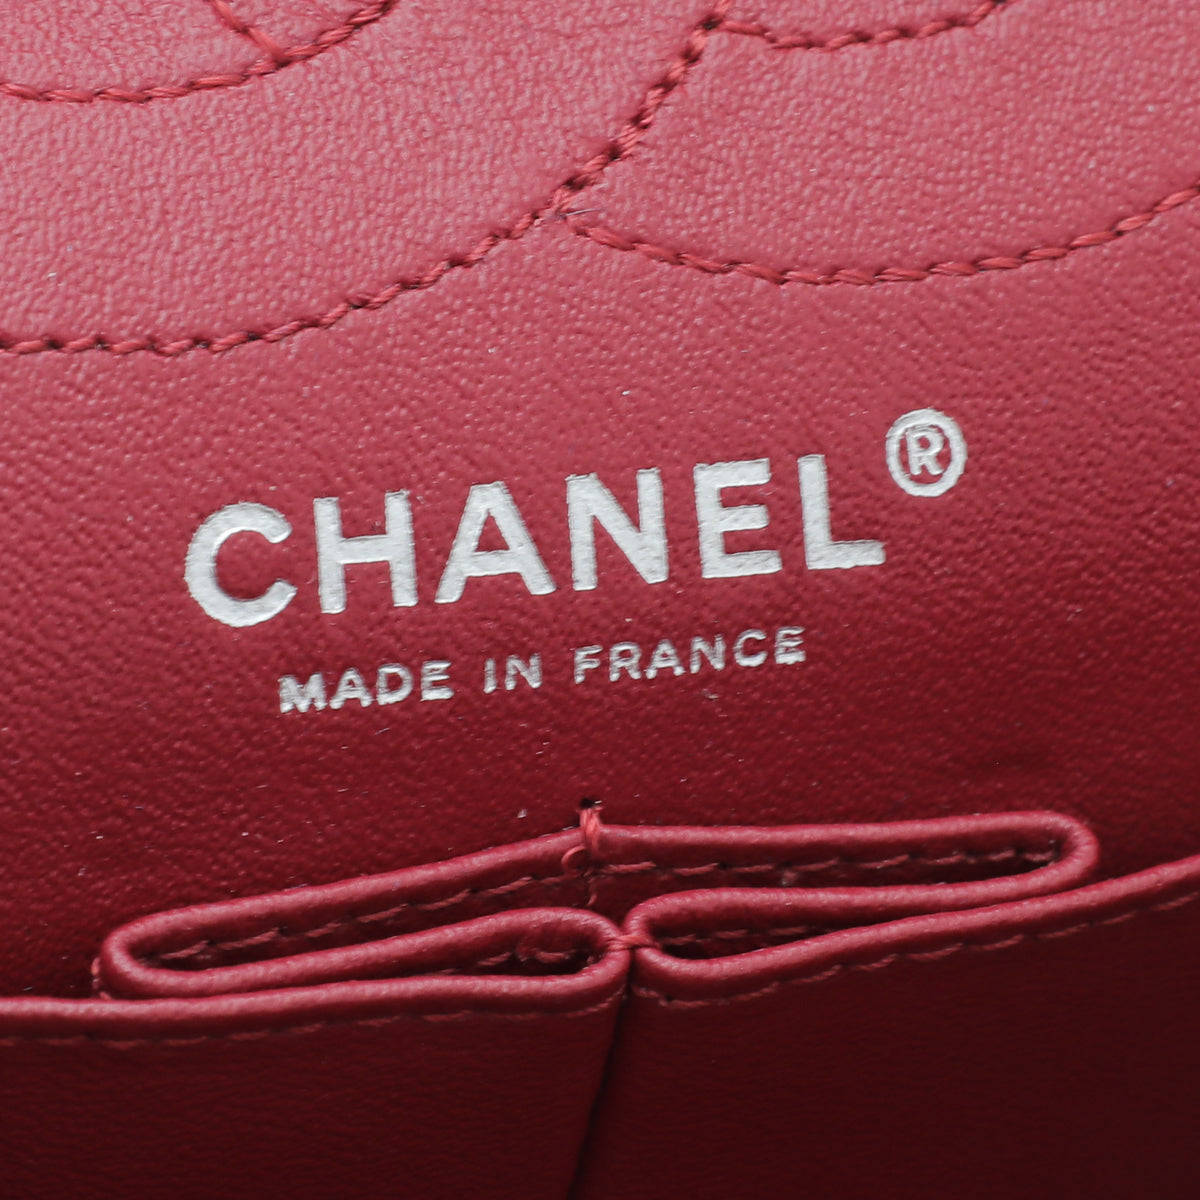 Chanel Red 2.55 Reissue 226 Flap Bag